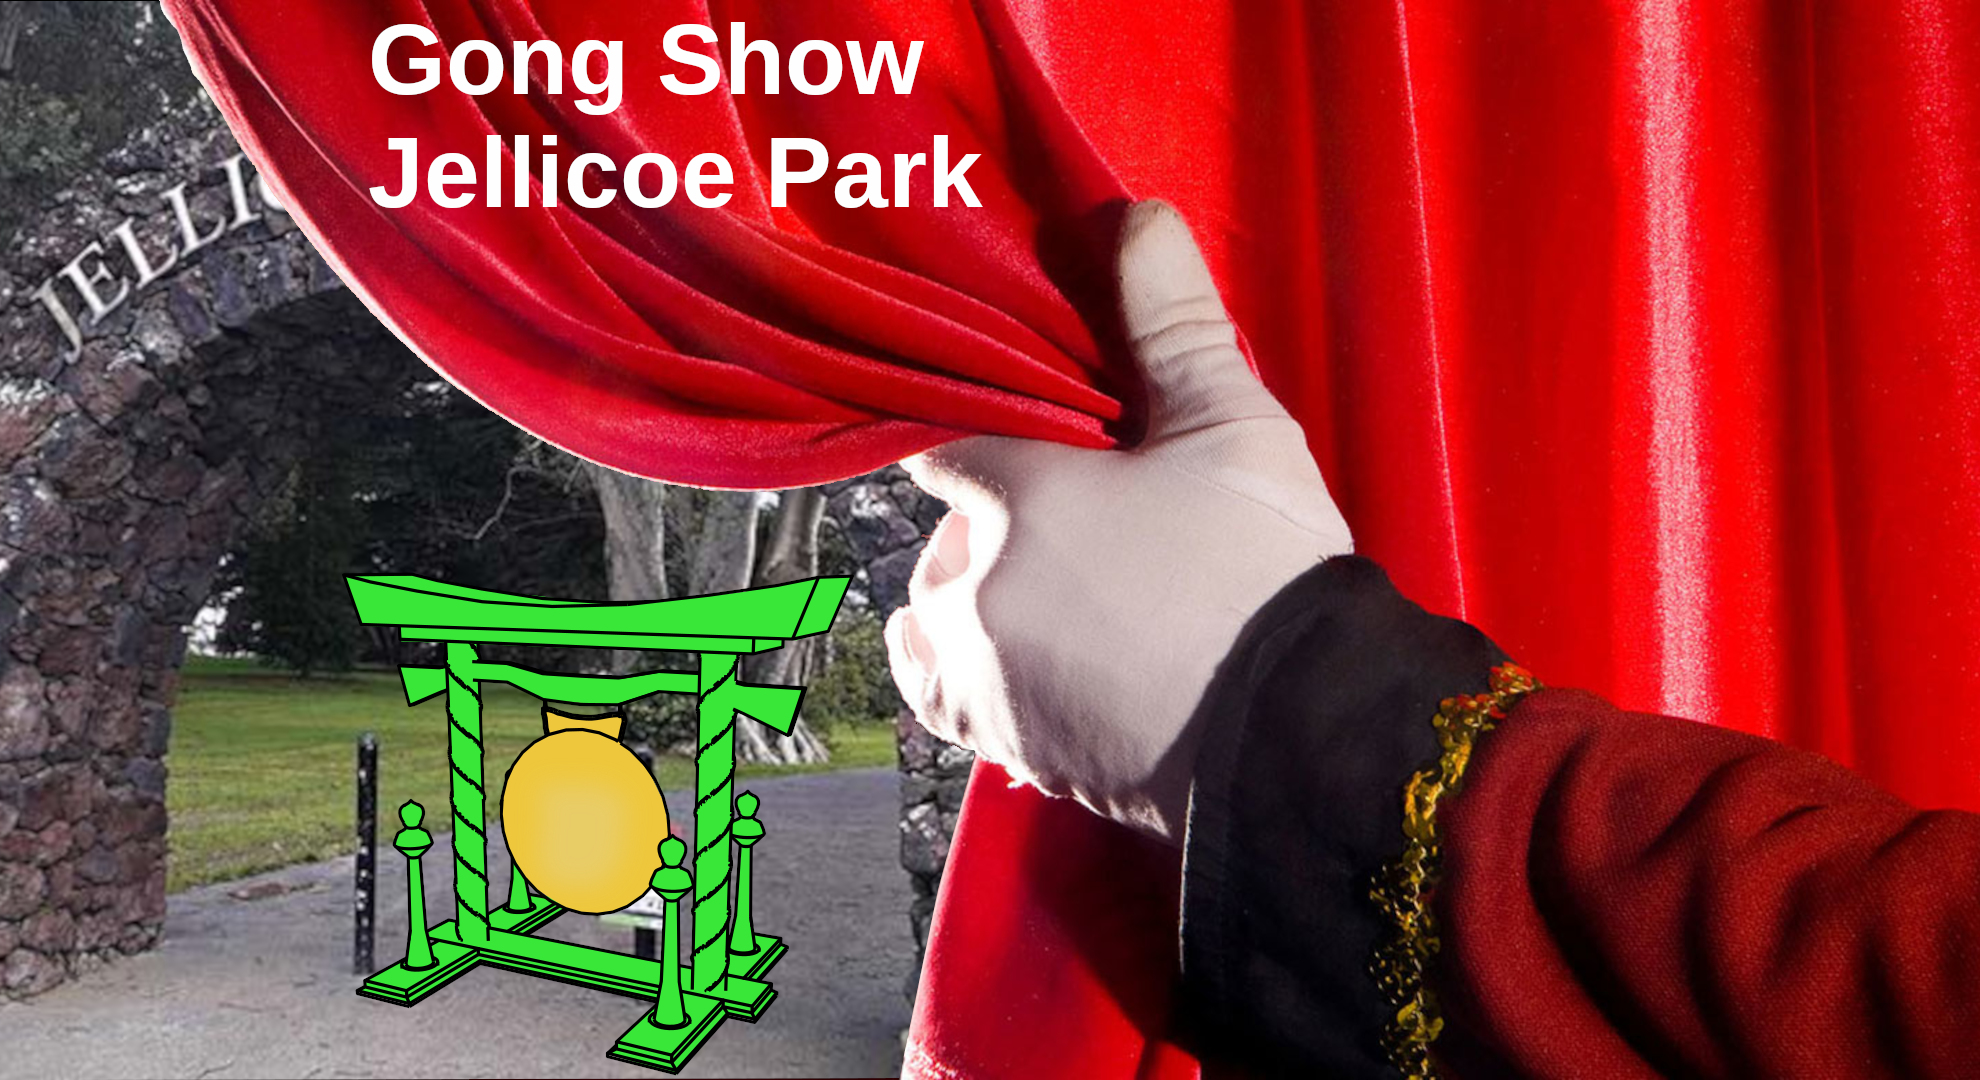 A gloved hand holds back a curtain revealing a gong overlapping the Memorial Arch in Jellicoe Park, Onehunga. Text: Gong Show Jellicoe Park